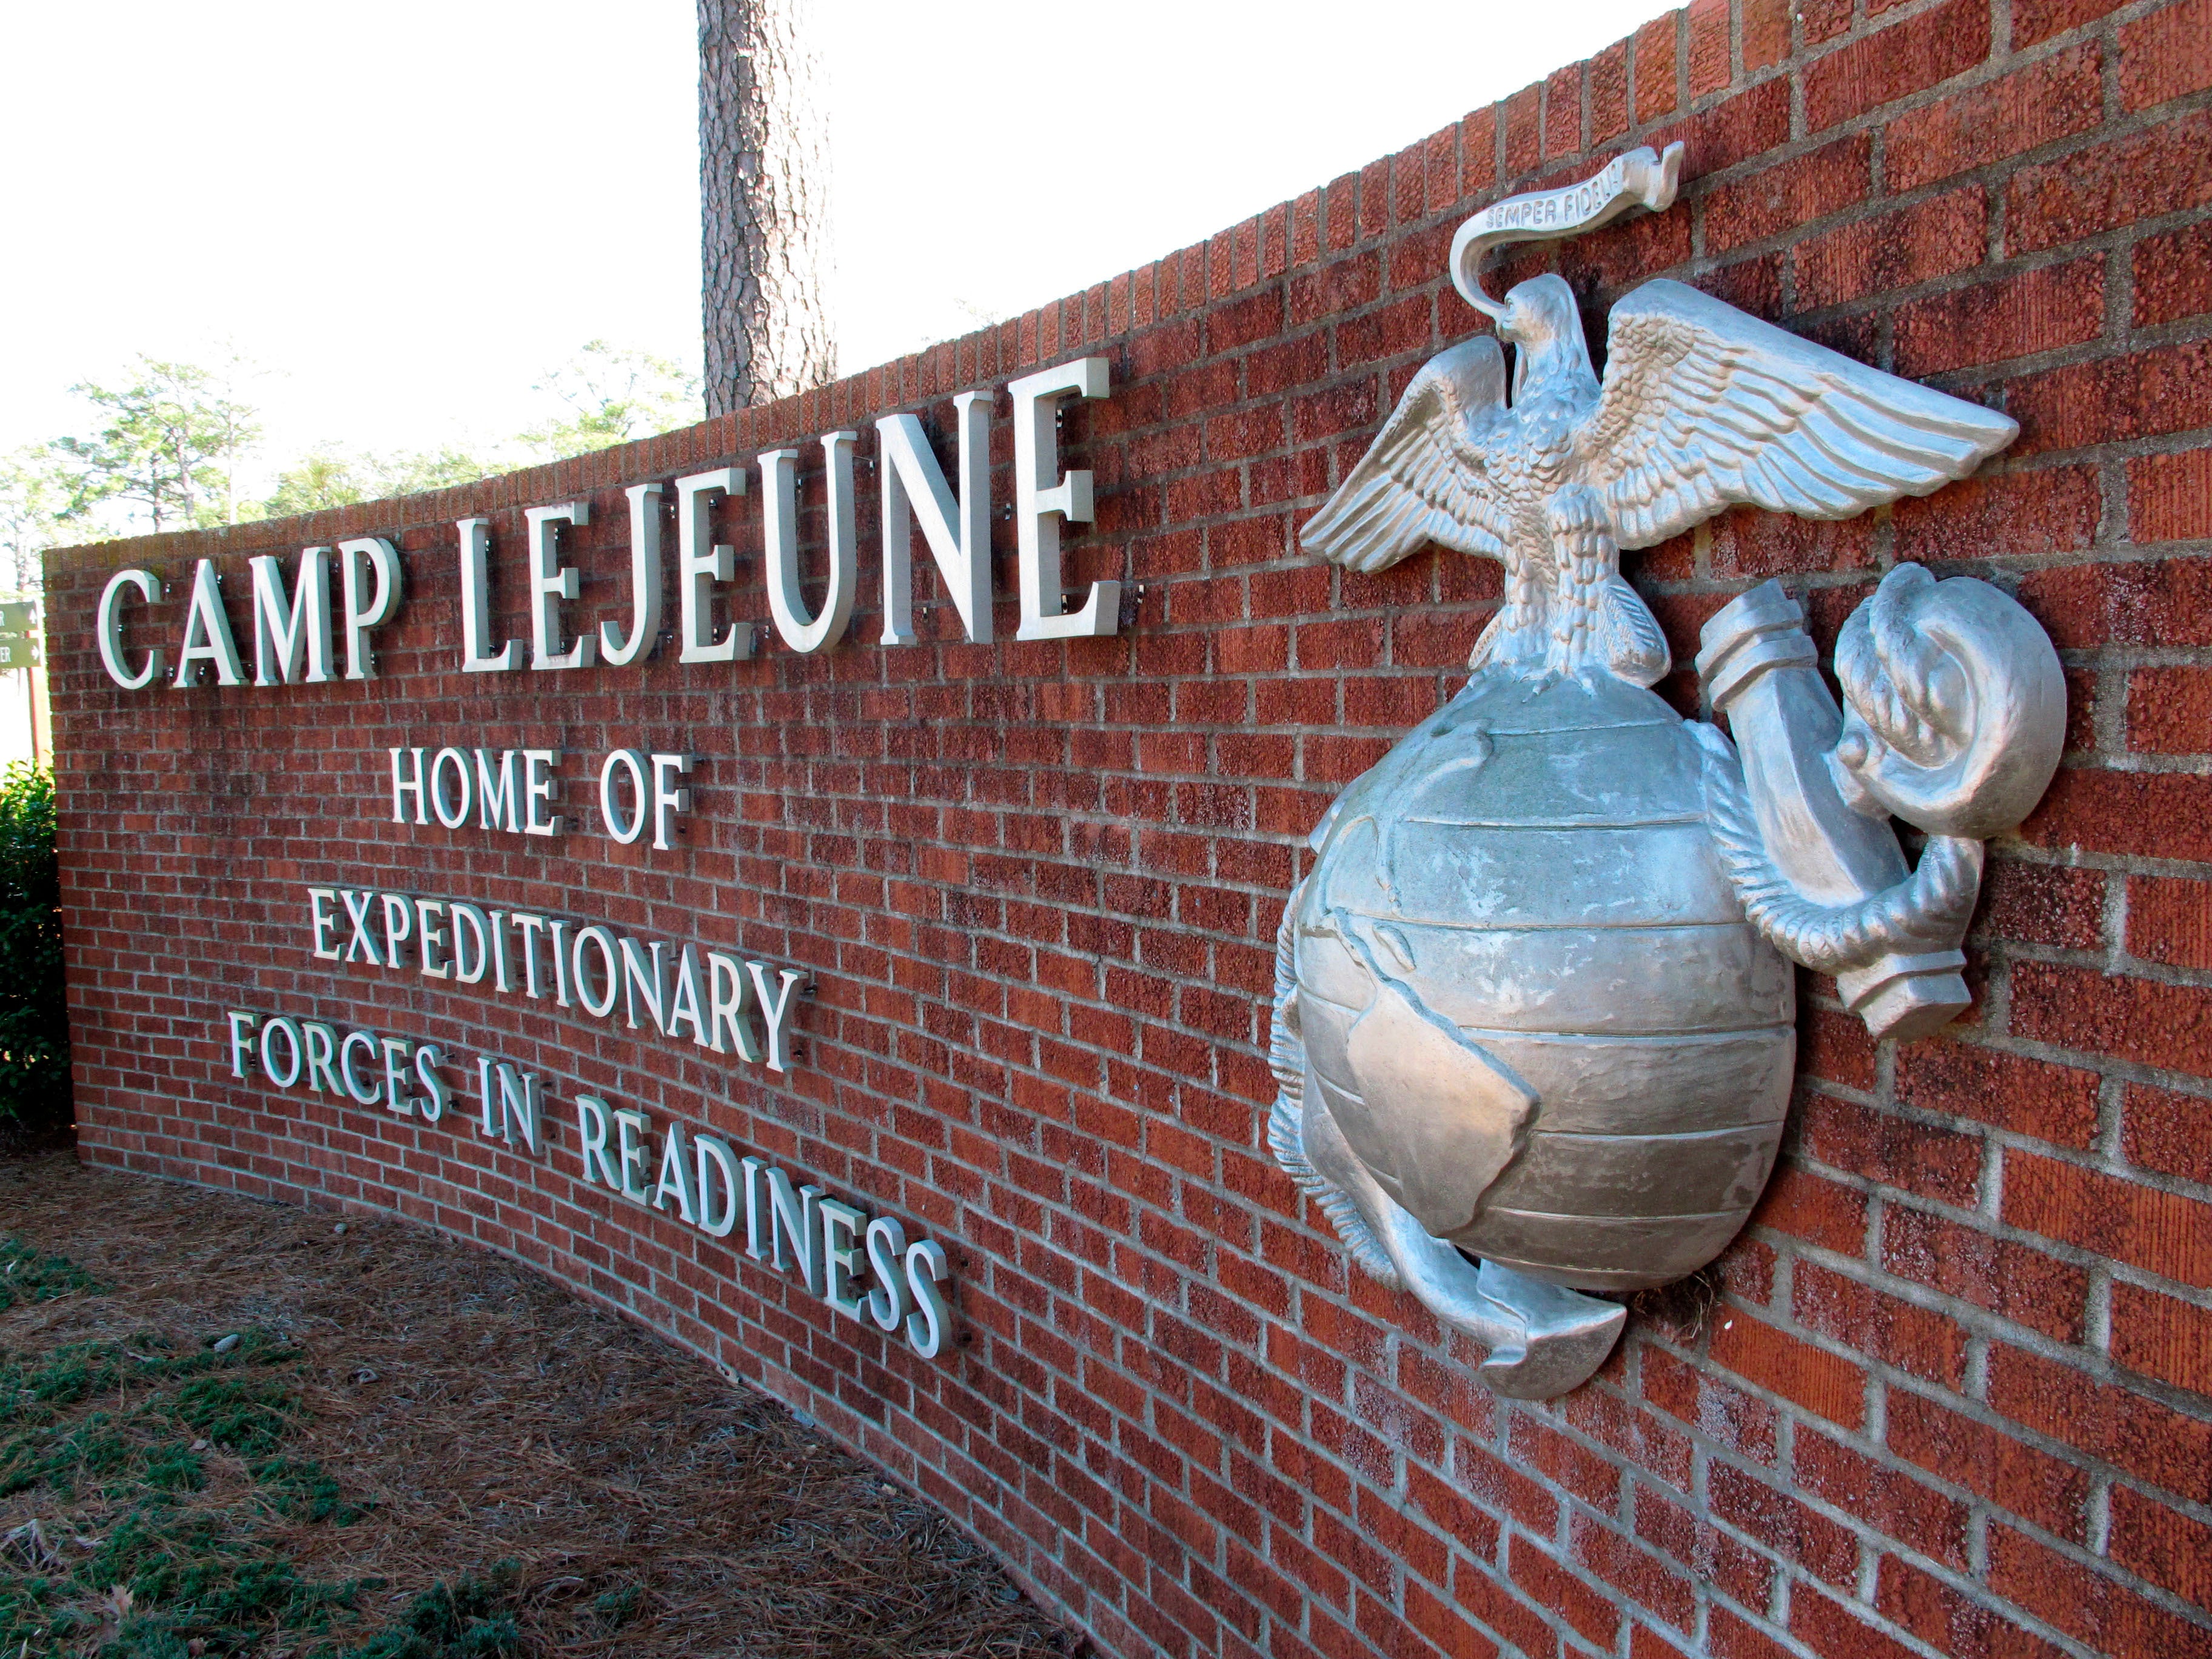 A military truck crash in North Carolina near the Camp Lejeune military base killed two US Marines and injured others on 19 January, 2021. (AP Photo/Allen Breed, File)